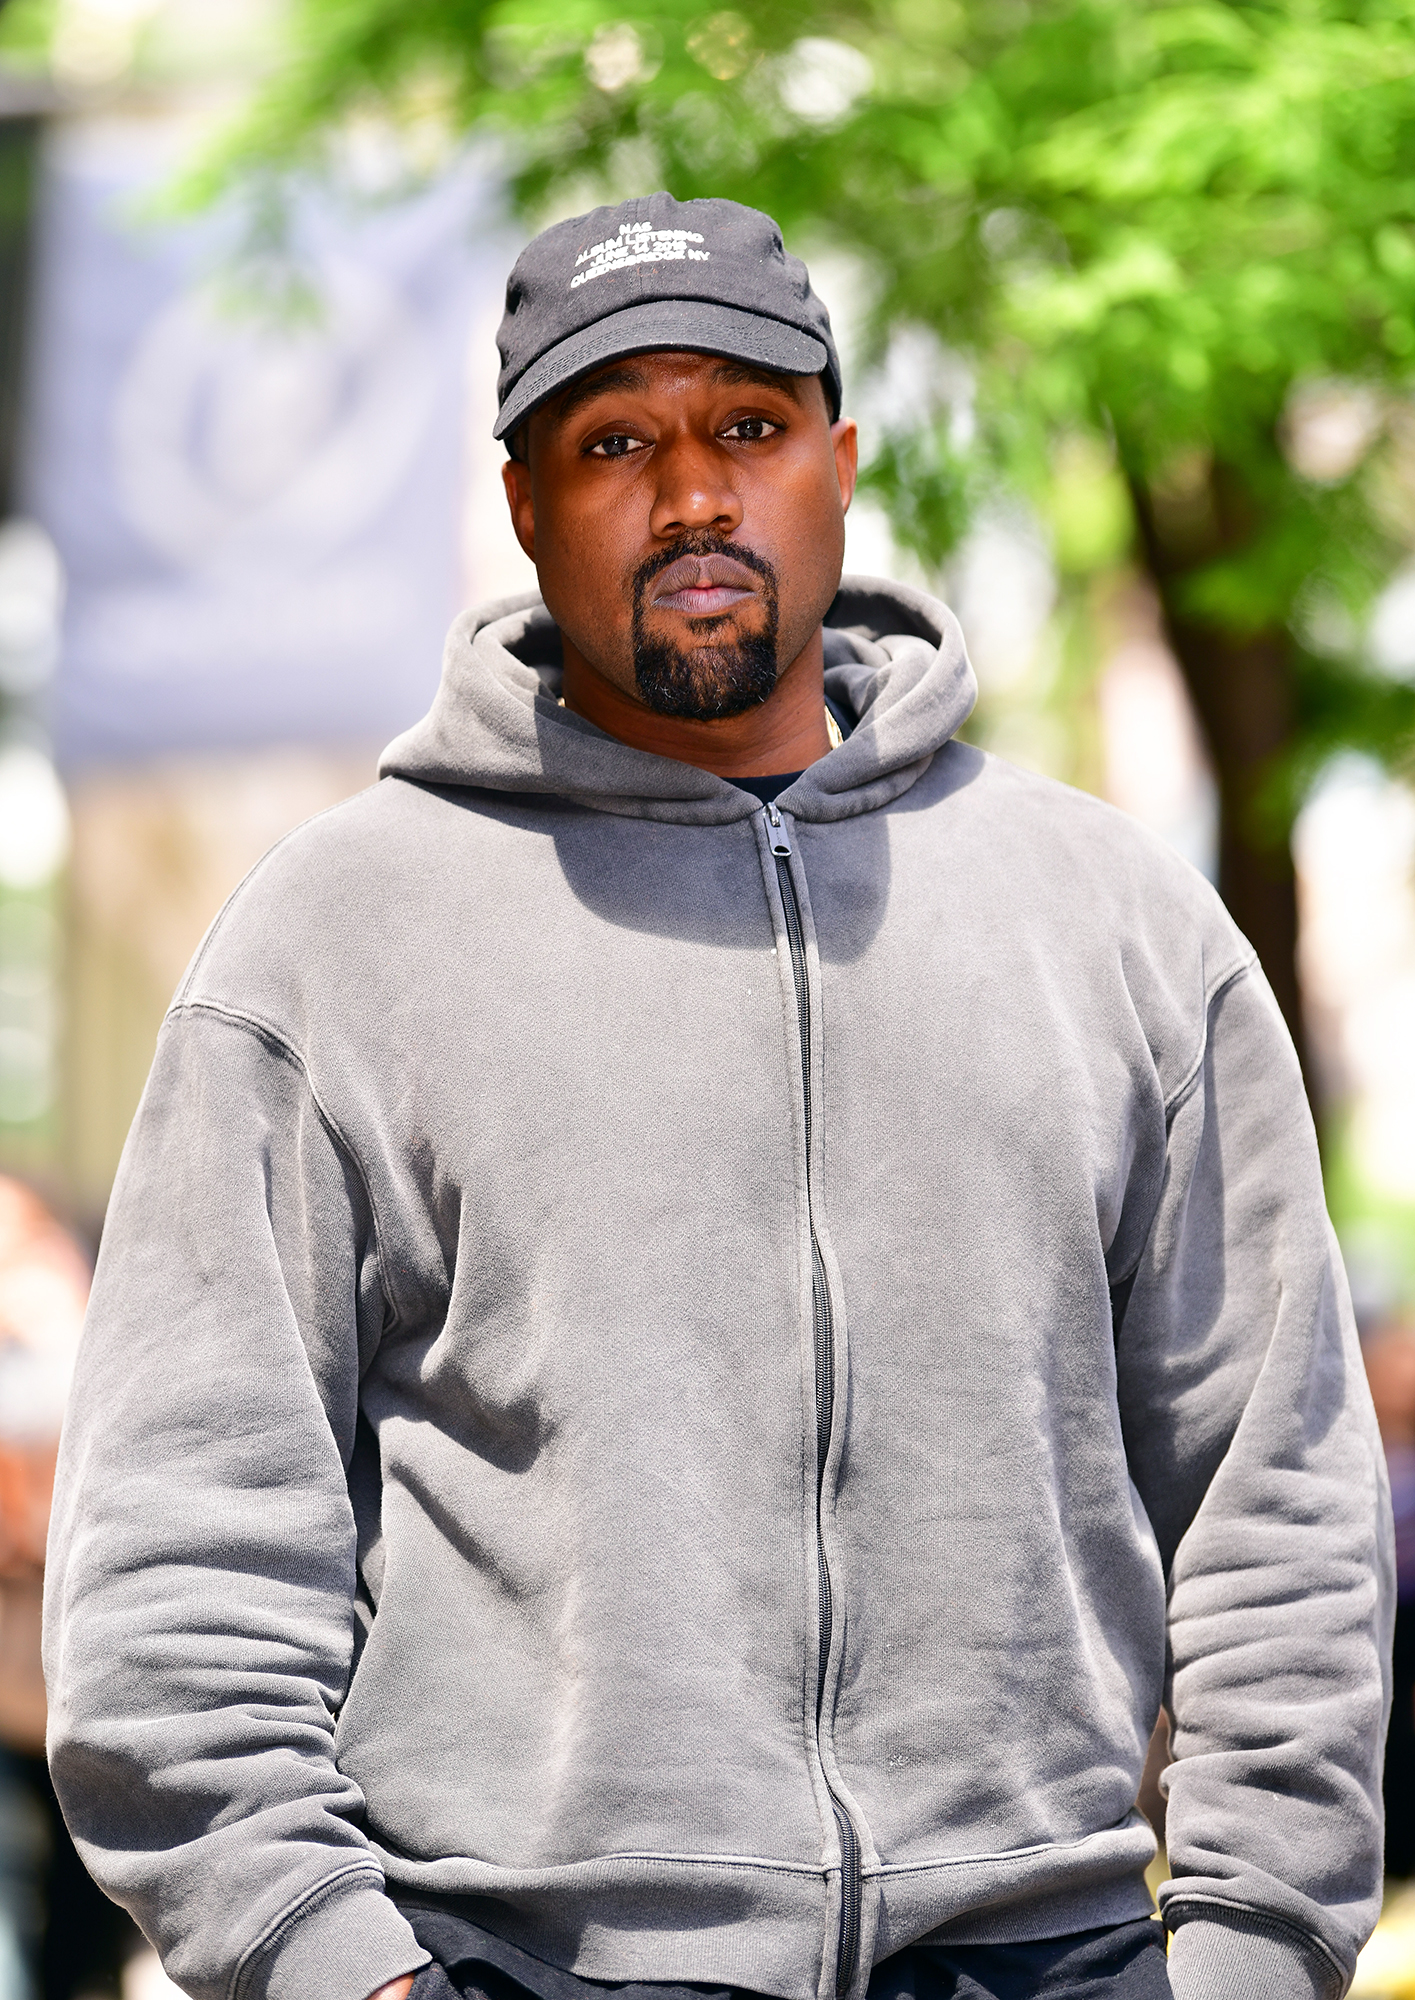 Www Xxx Bf Girl Boy - Kanye West: 'I Still Look at Pornhub' After Having Daughters